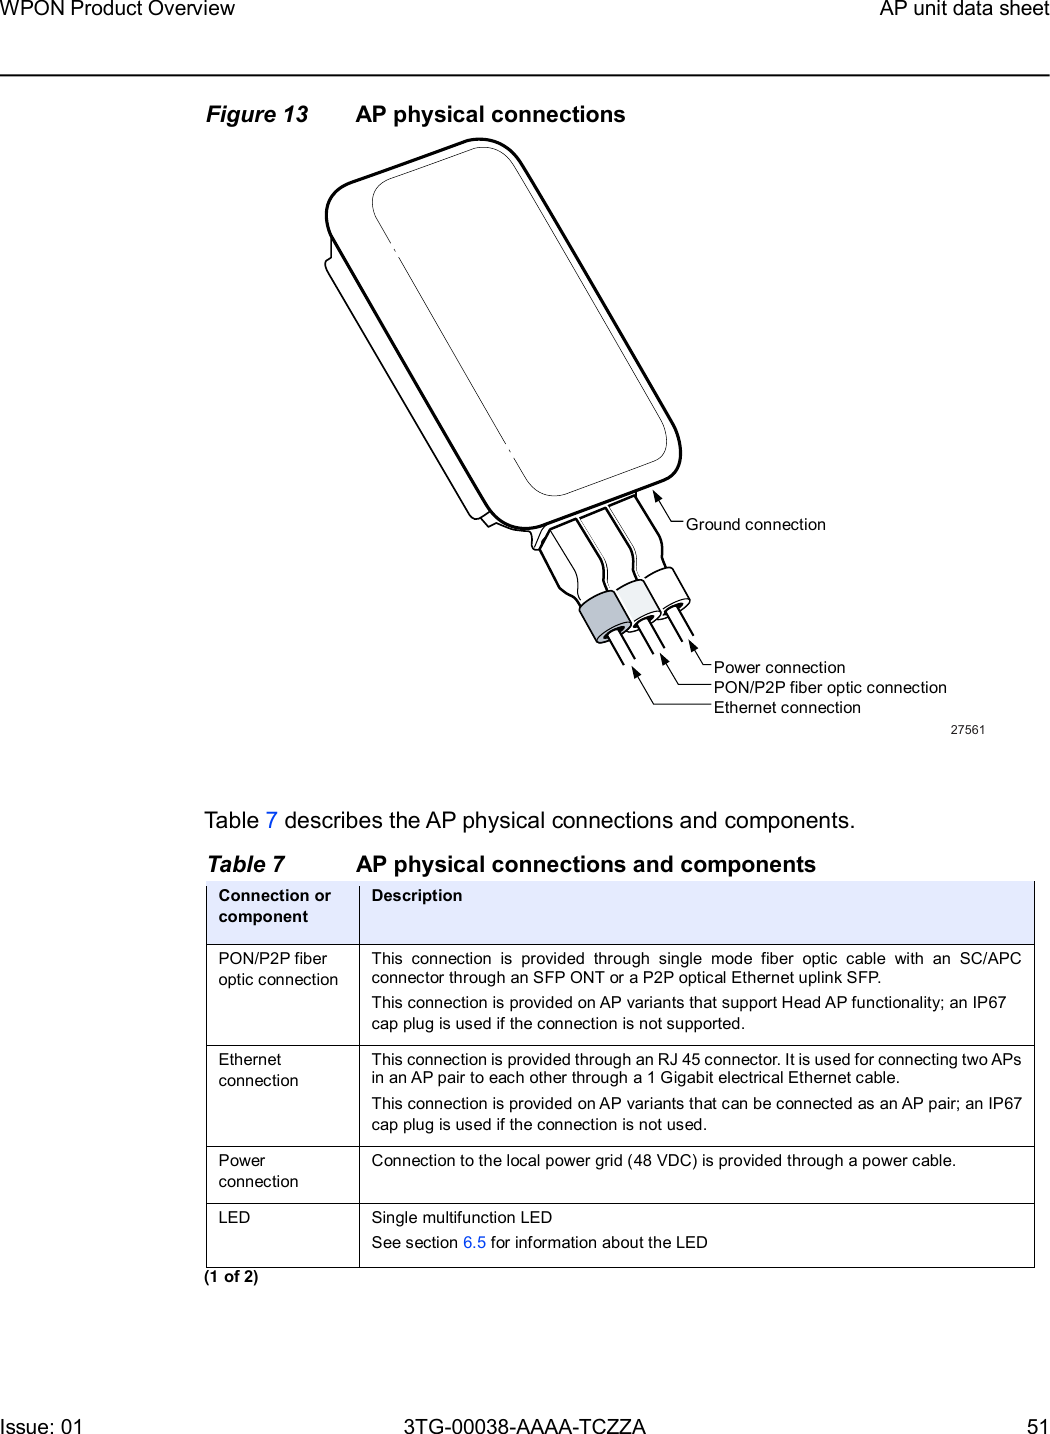 Page 51 of Nokia Bell 7577WPONAPED WPON User Manual WPON Product Overview